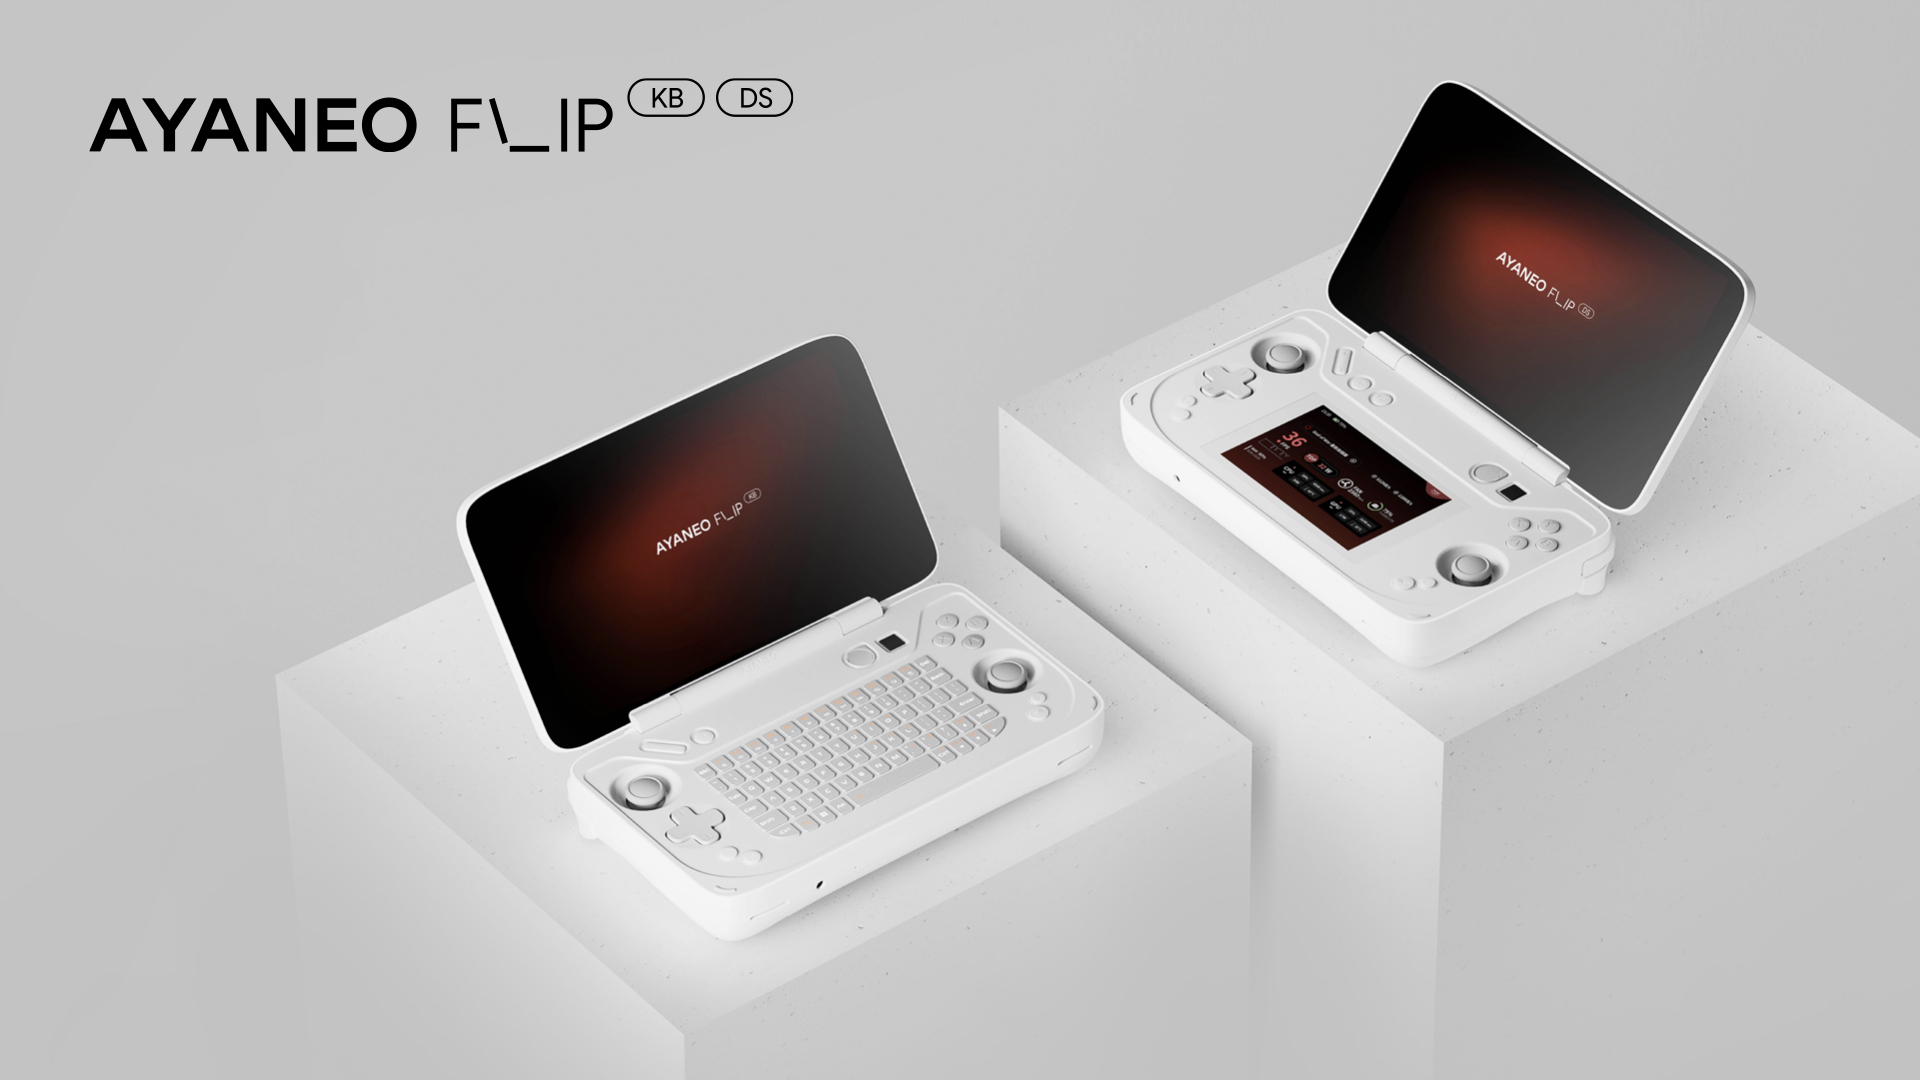 Ayaneo Flip gets crucial upgrade that ditches popular handheld chip 